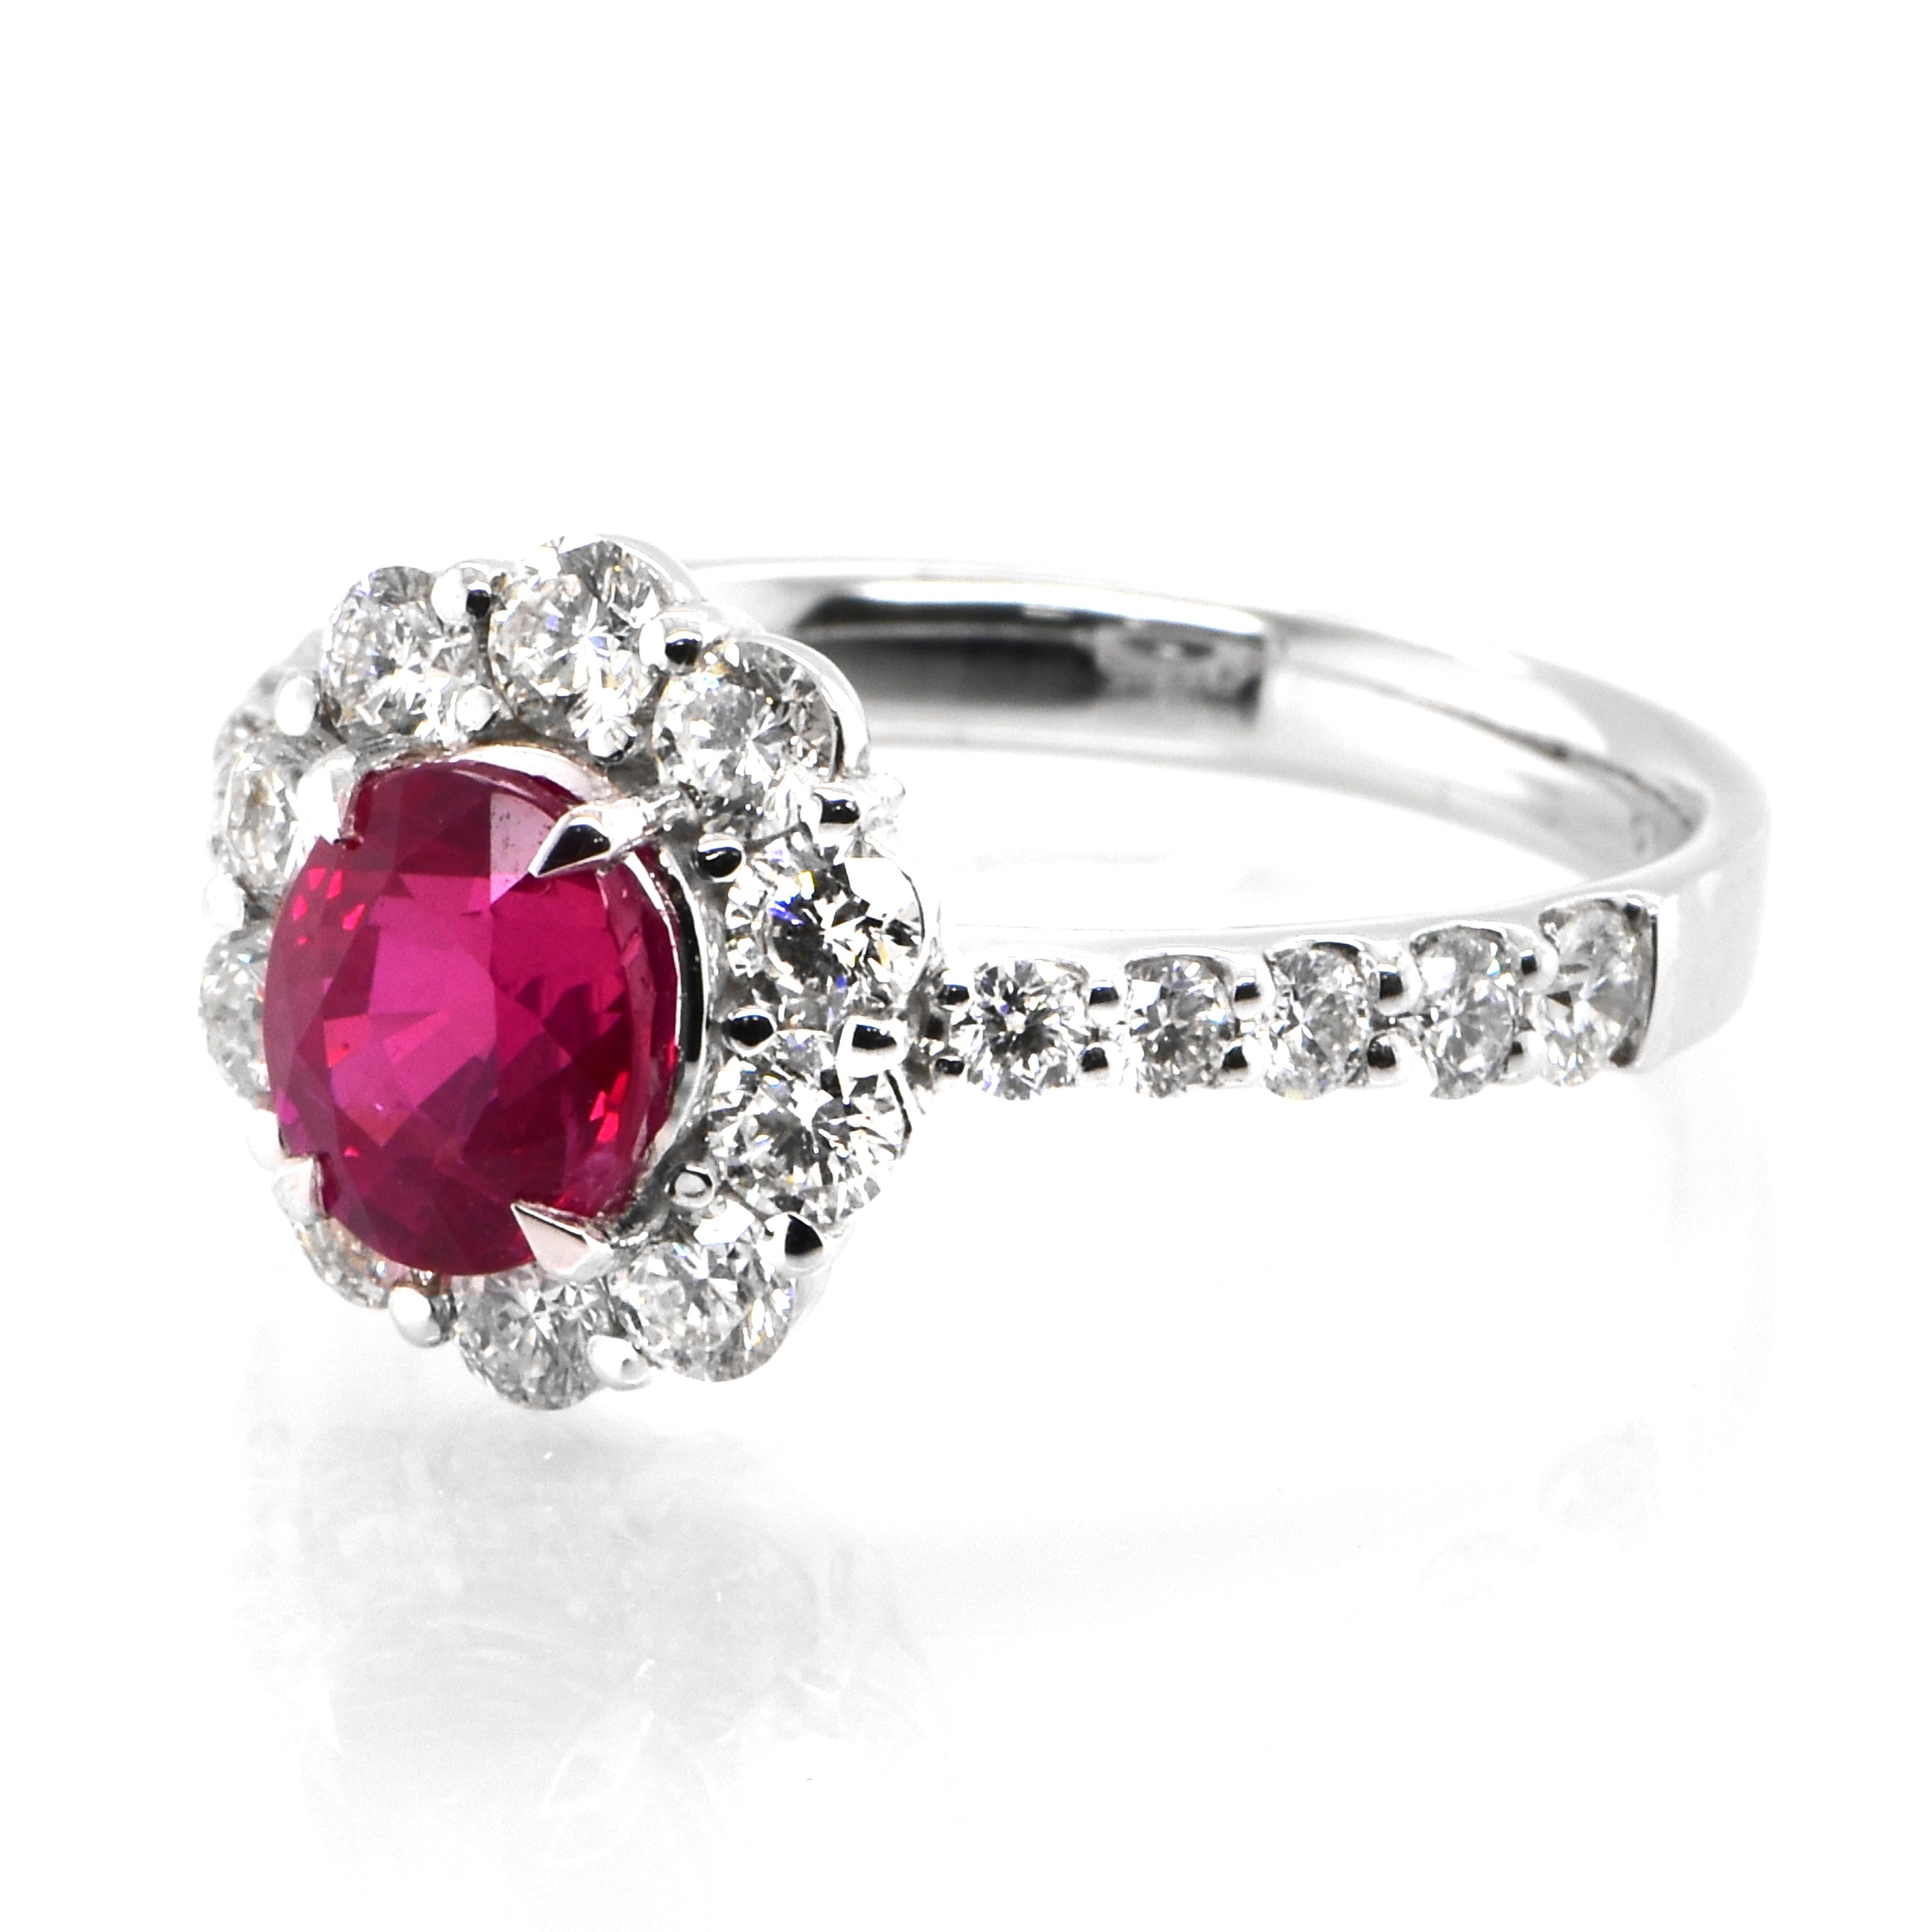 Oval Cut GIA Certified 1.54 Carat Untreated (No Heat) Ruby & Diamond Ring Set in Platinum For Sale